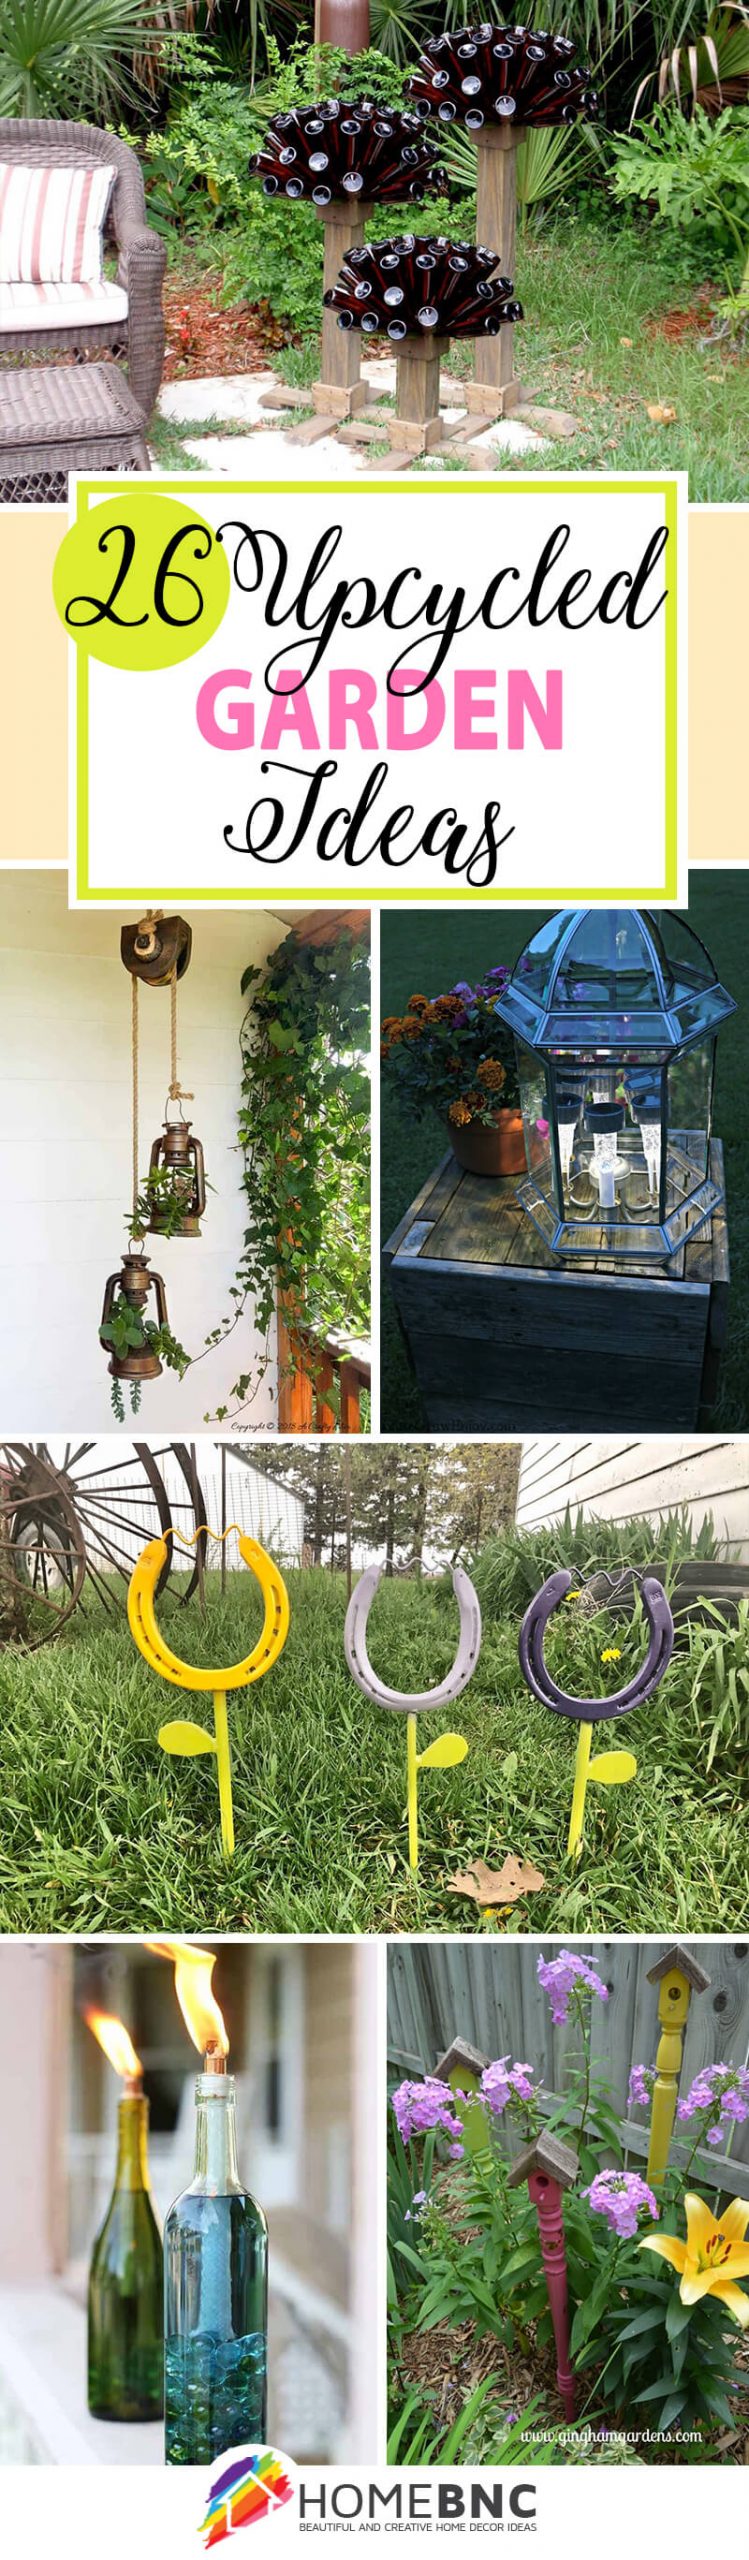 20 Best Upcycled Garden Ideas to Dress Up Your Outdoor Space in 20